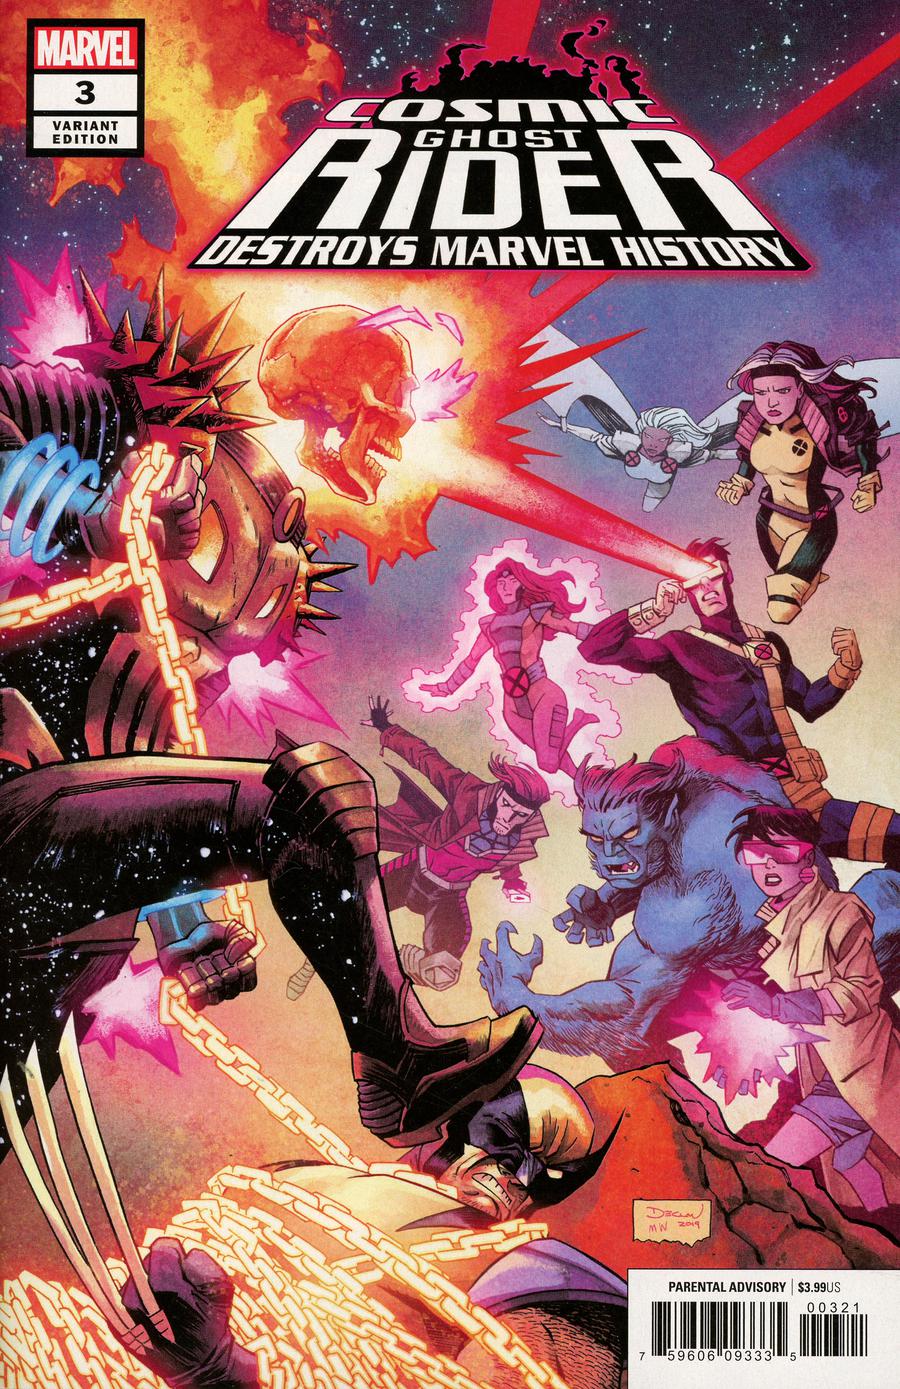 Cosmic Ghost Rider Destroys Marvel History #3 Cover B Variant Declan Shalvey Cover